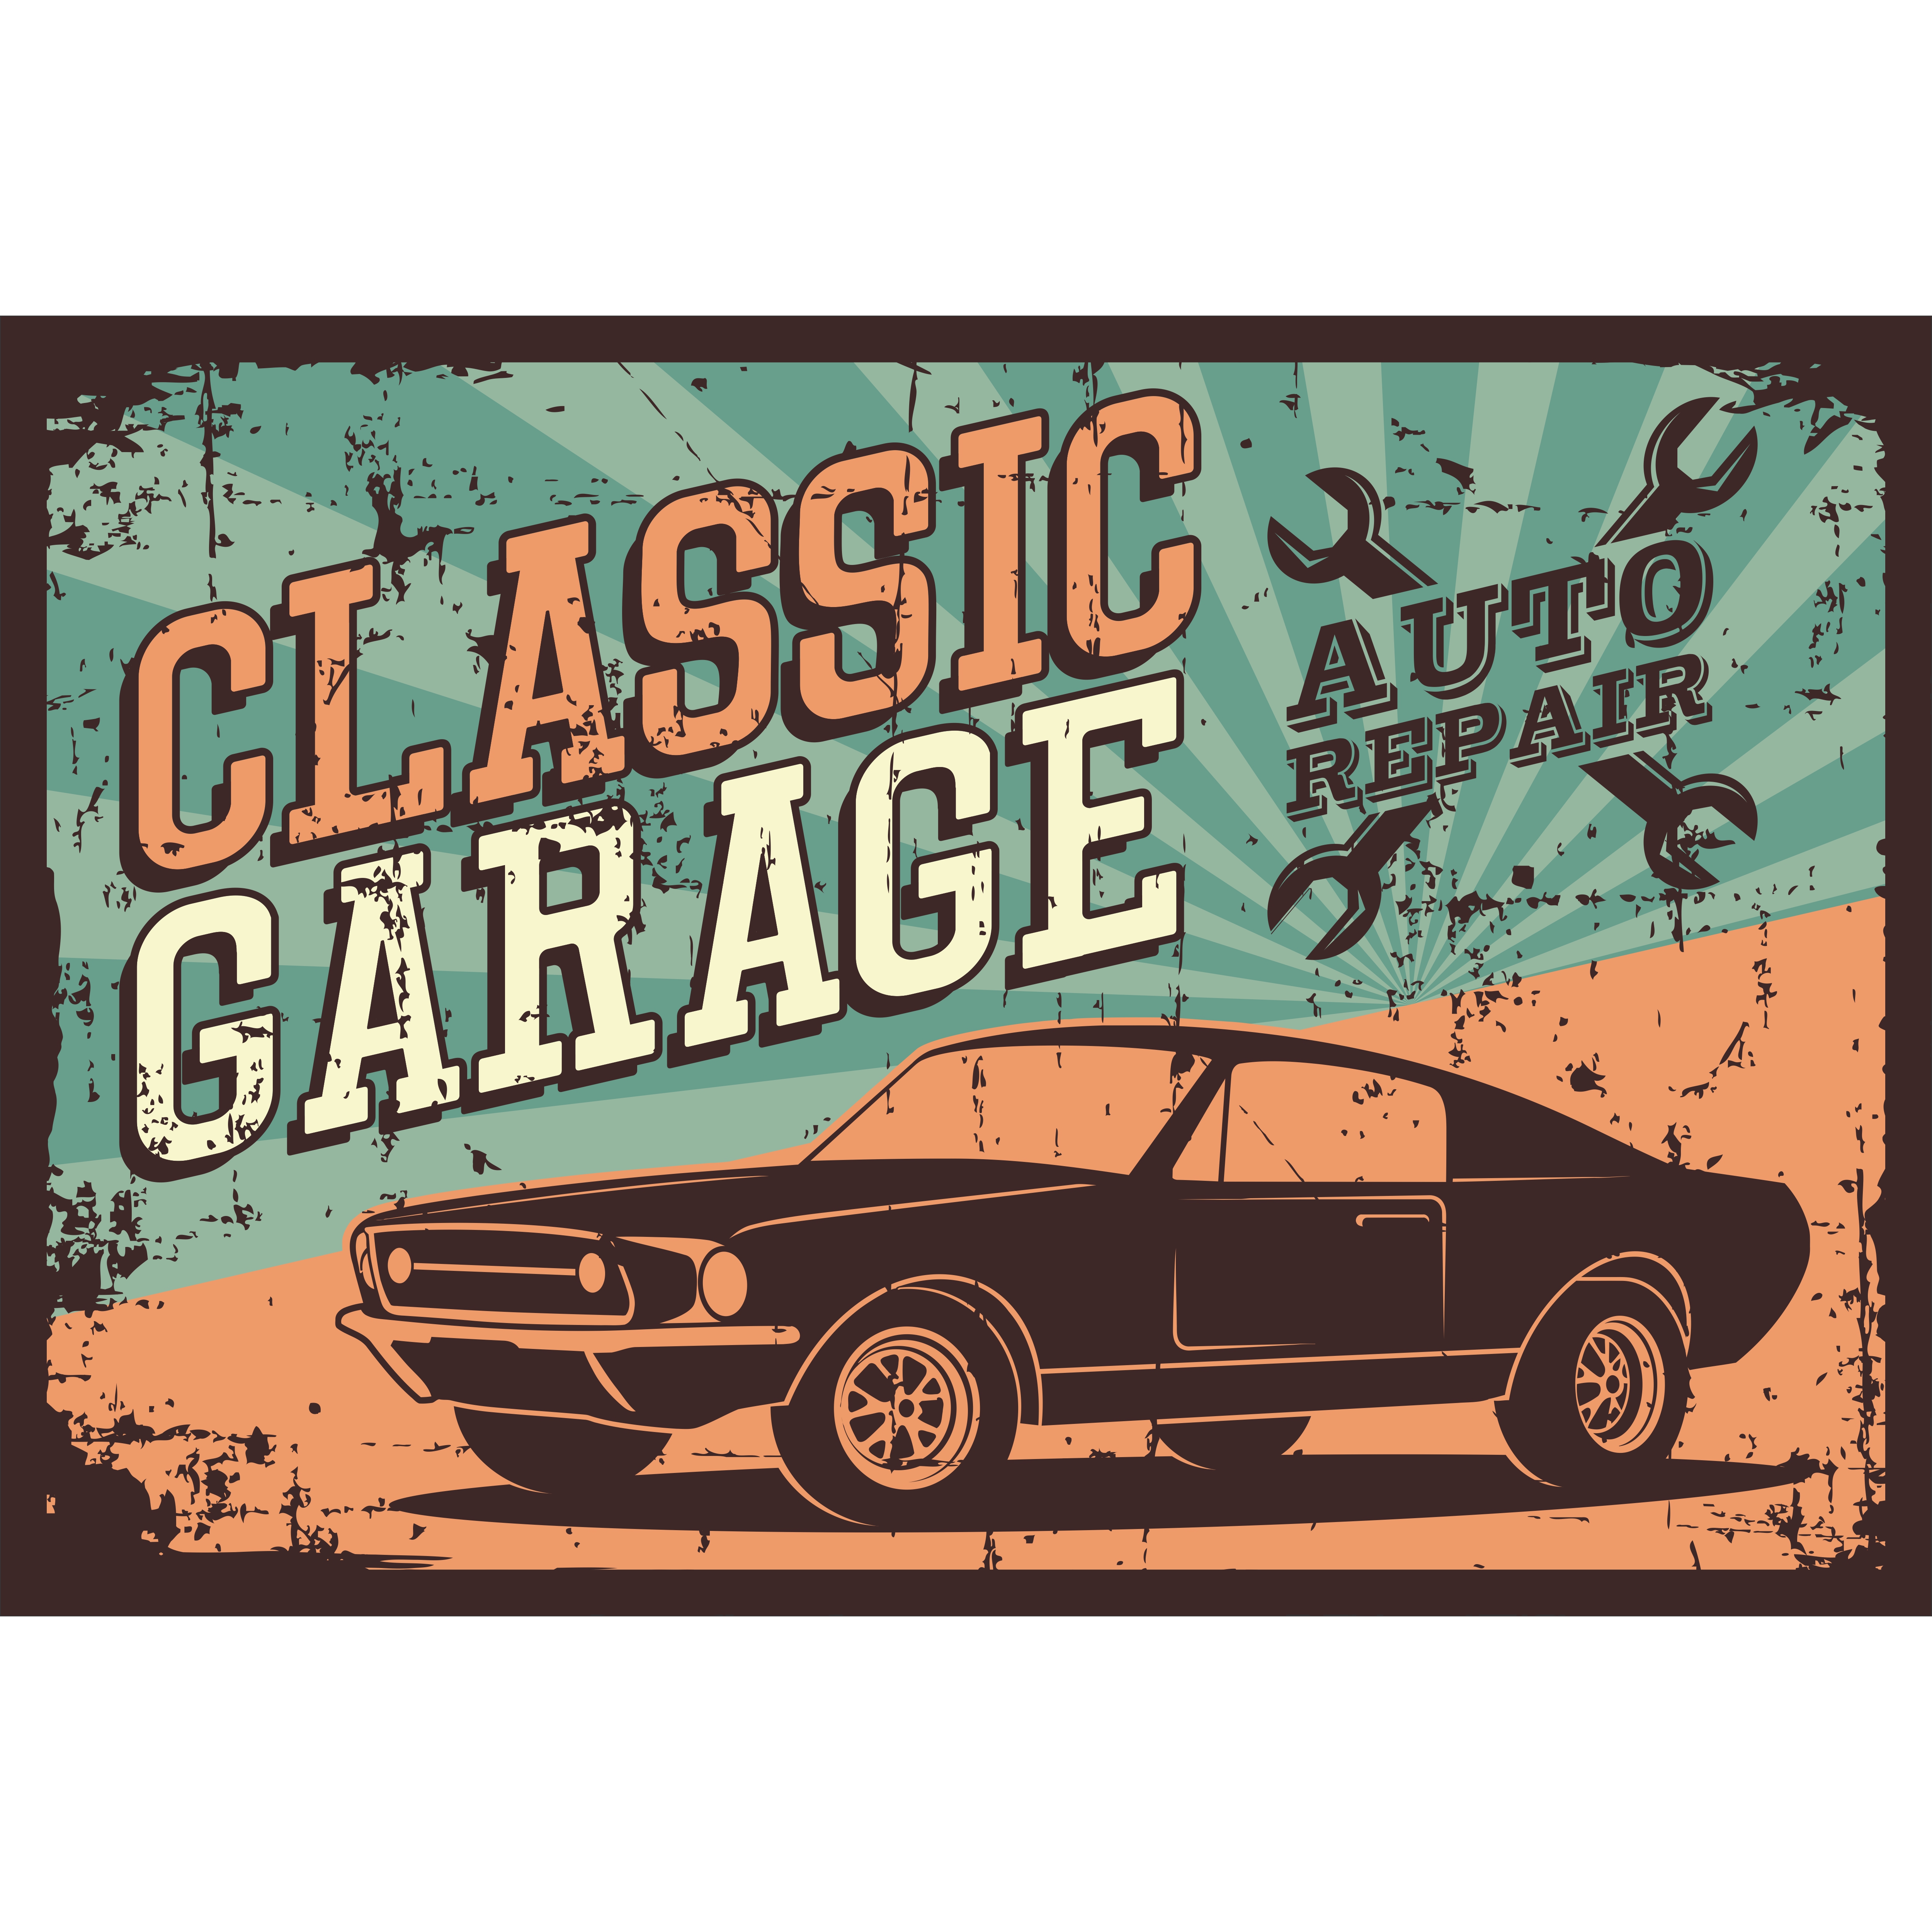 Vector illustration with the image of an old classic car, design logos